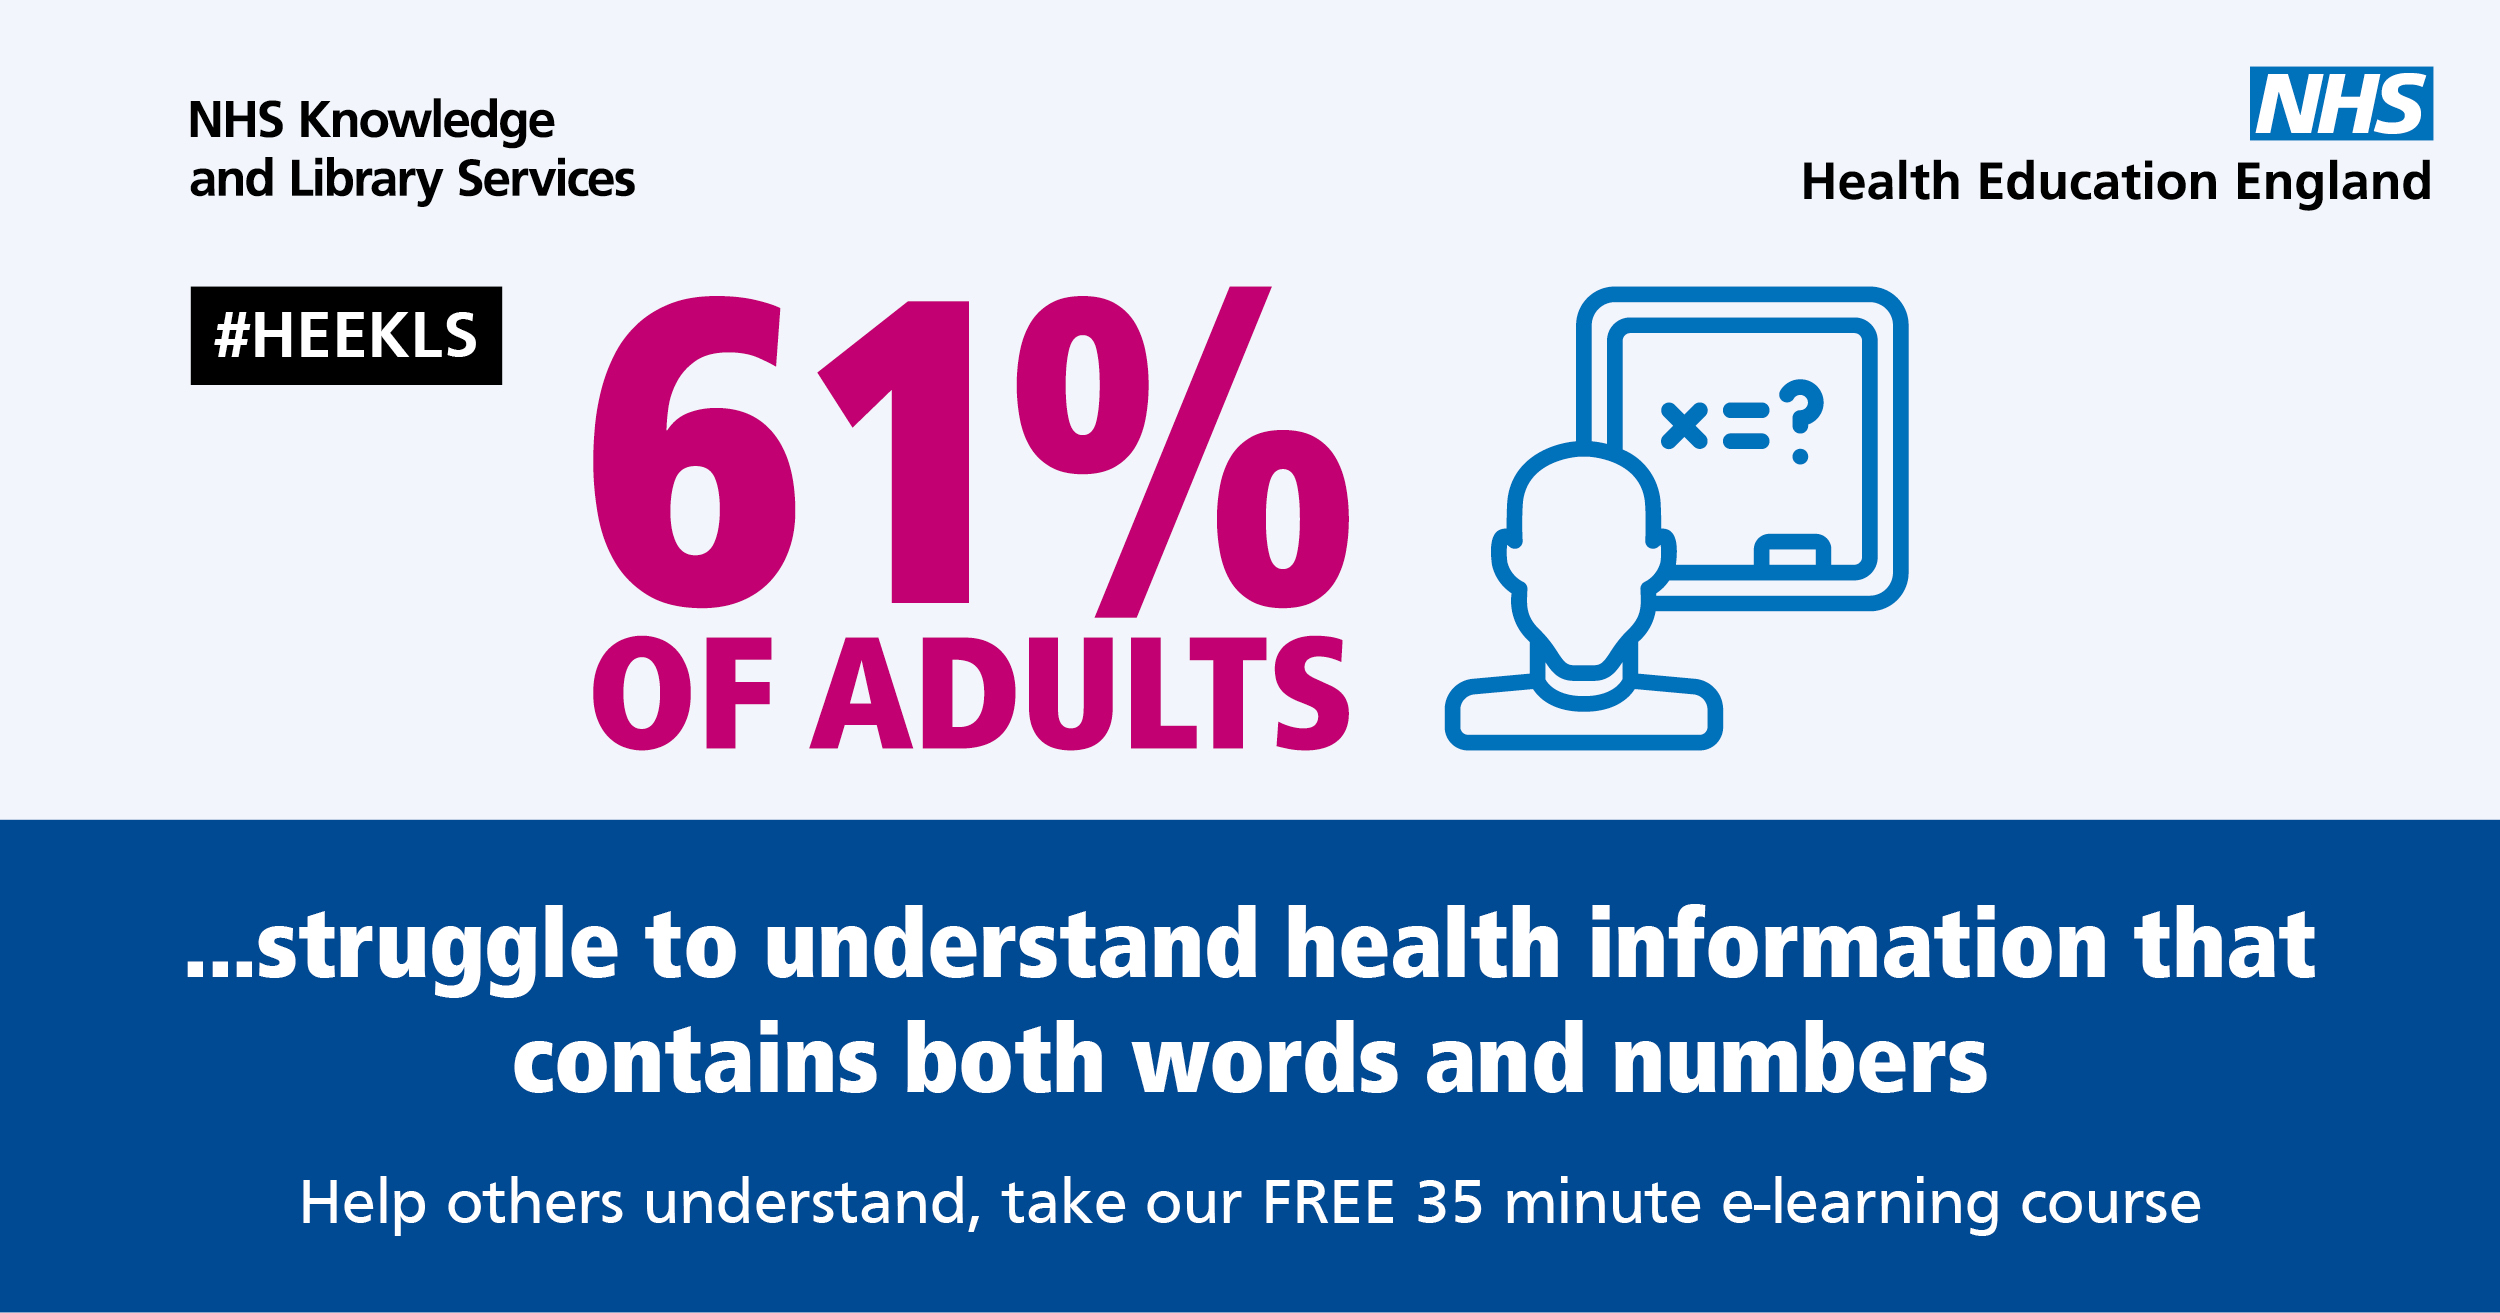 61% of adults struggle to understand health information that contains both words and numbers. Help others understand. Take our free 35 minute e-learning course. 